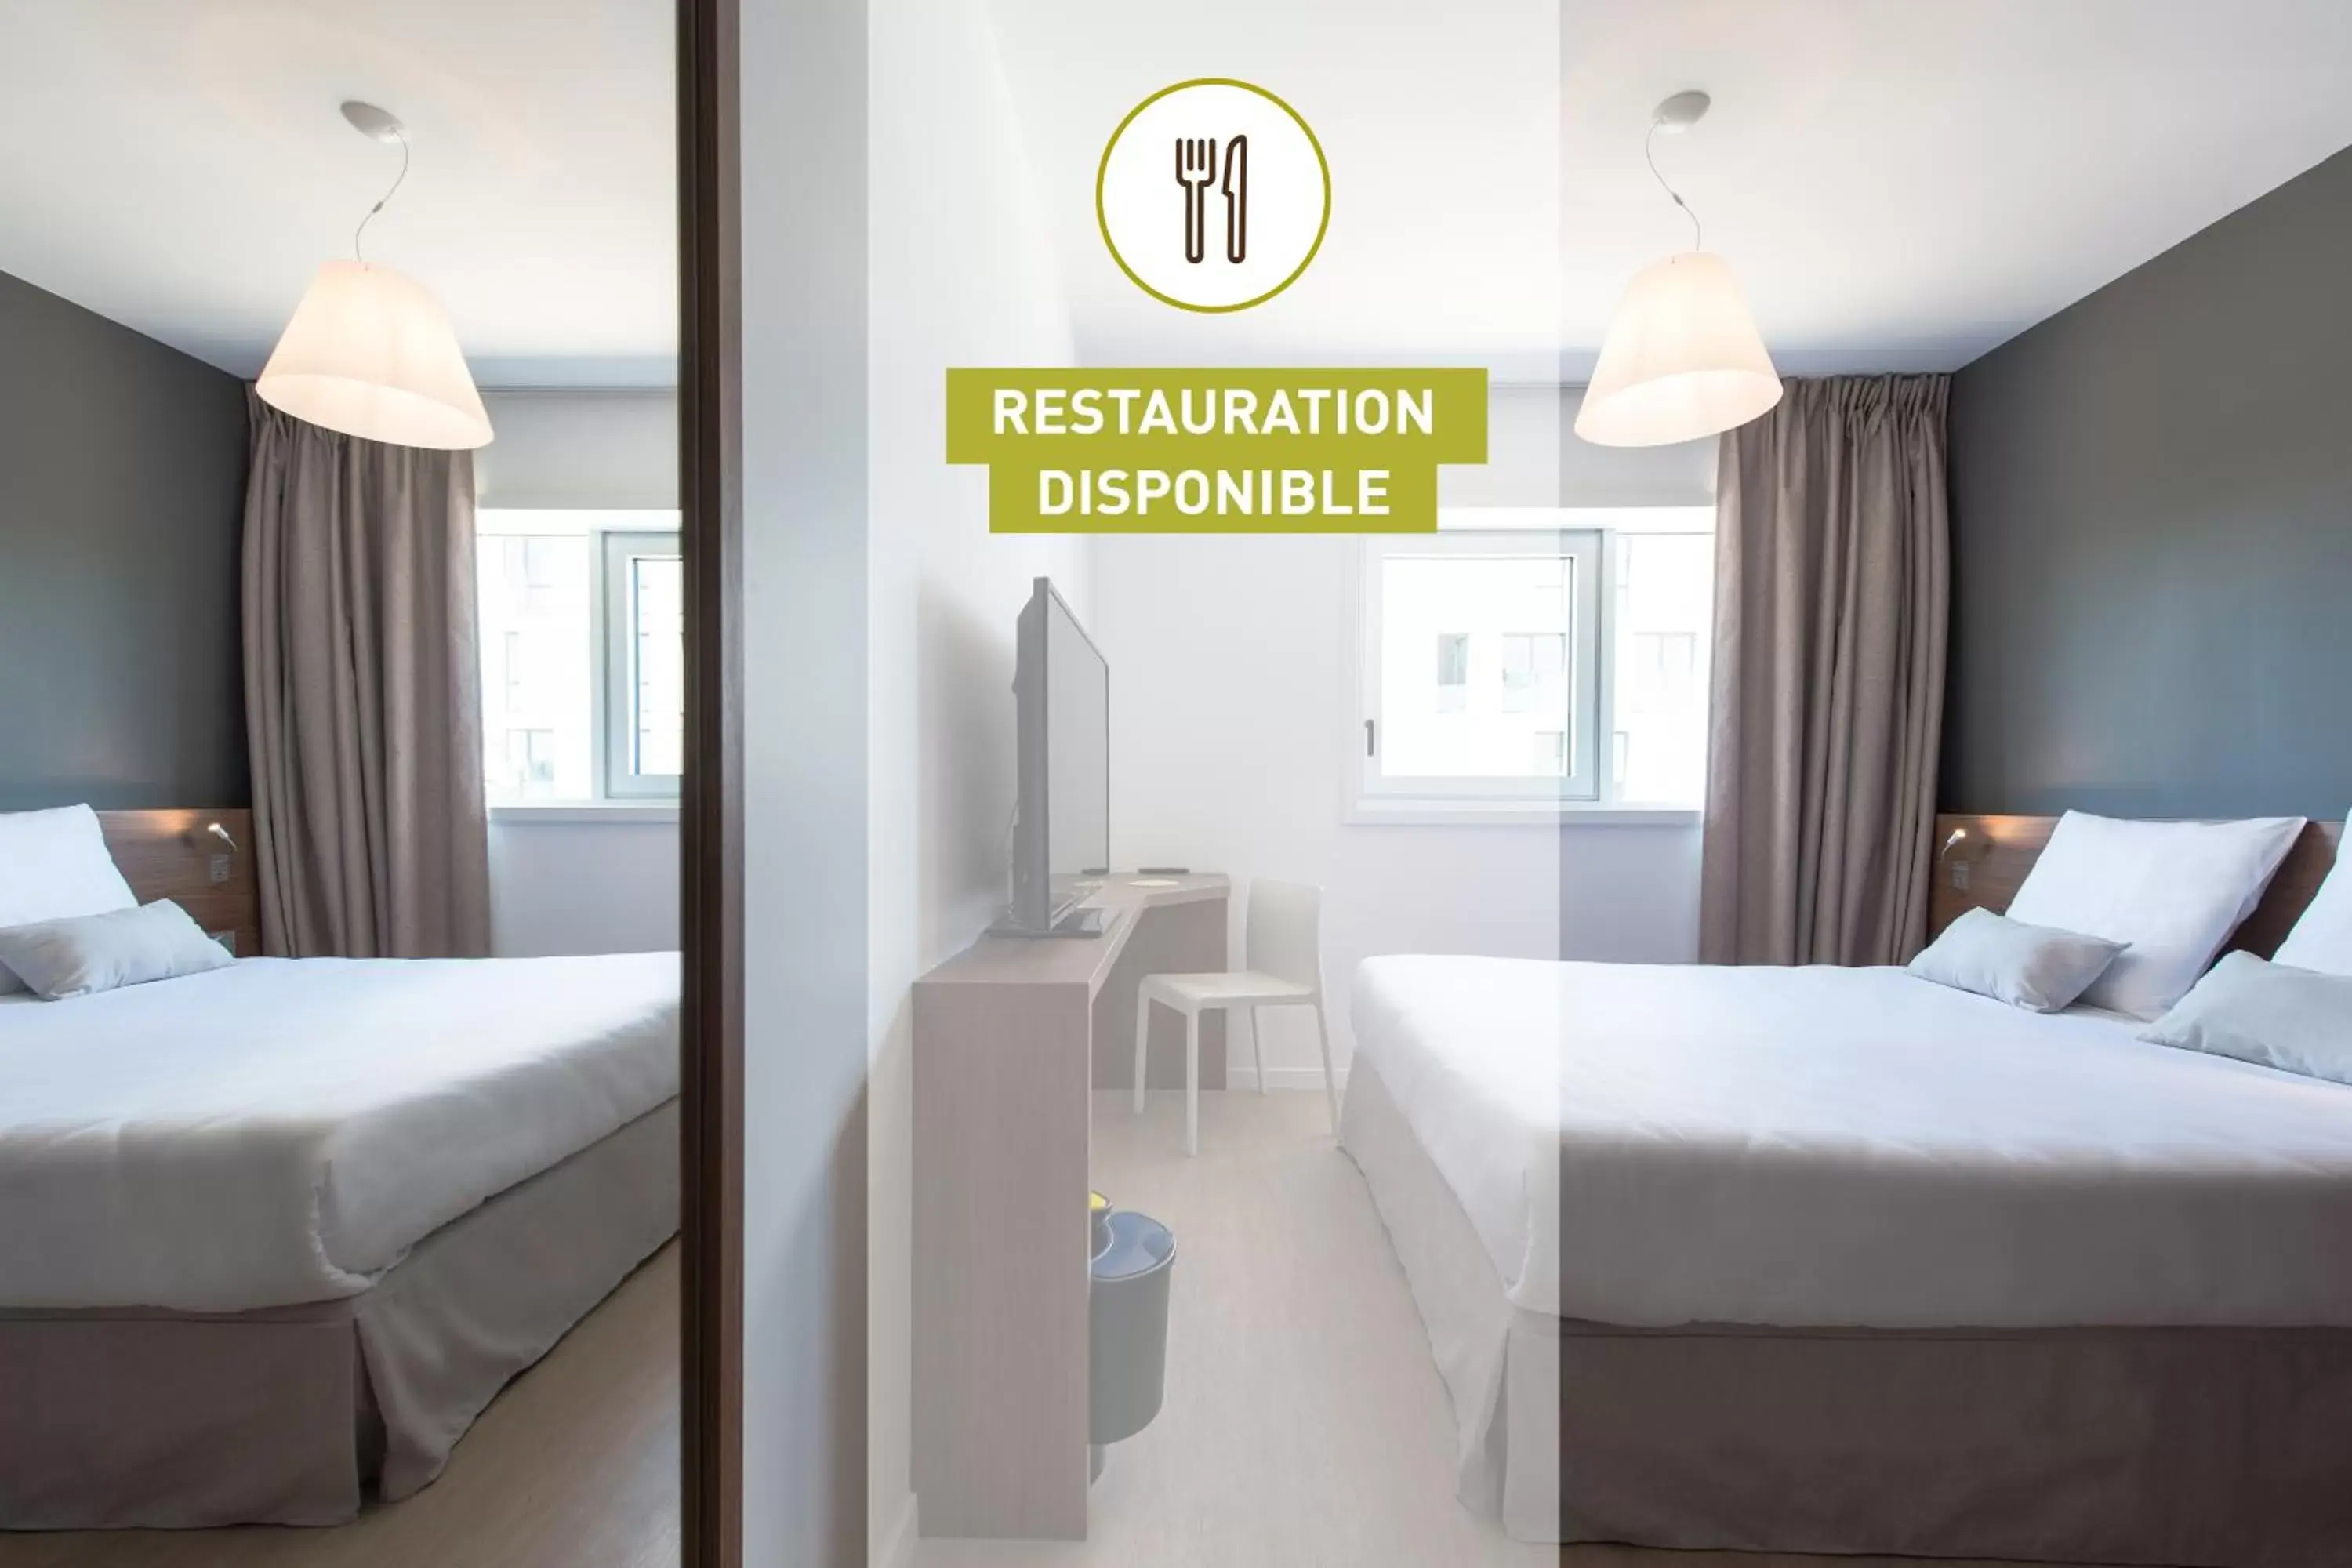 Food and drinks in B&B HOTEL Saint-Nazaire Pornichet